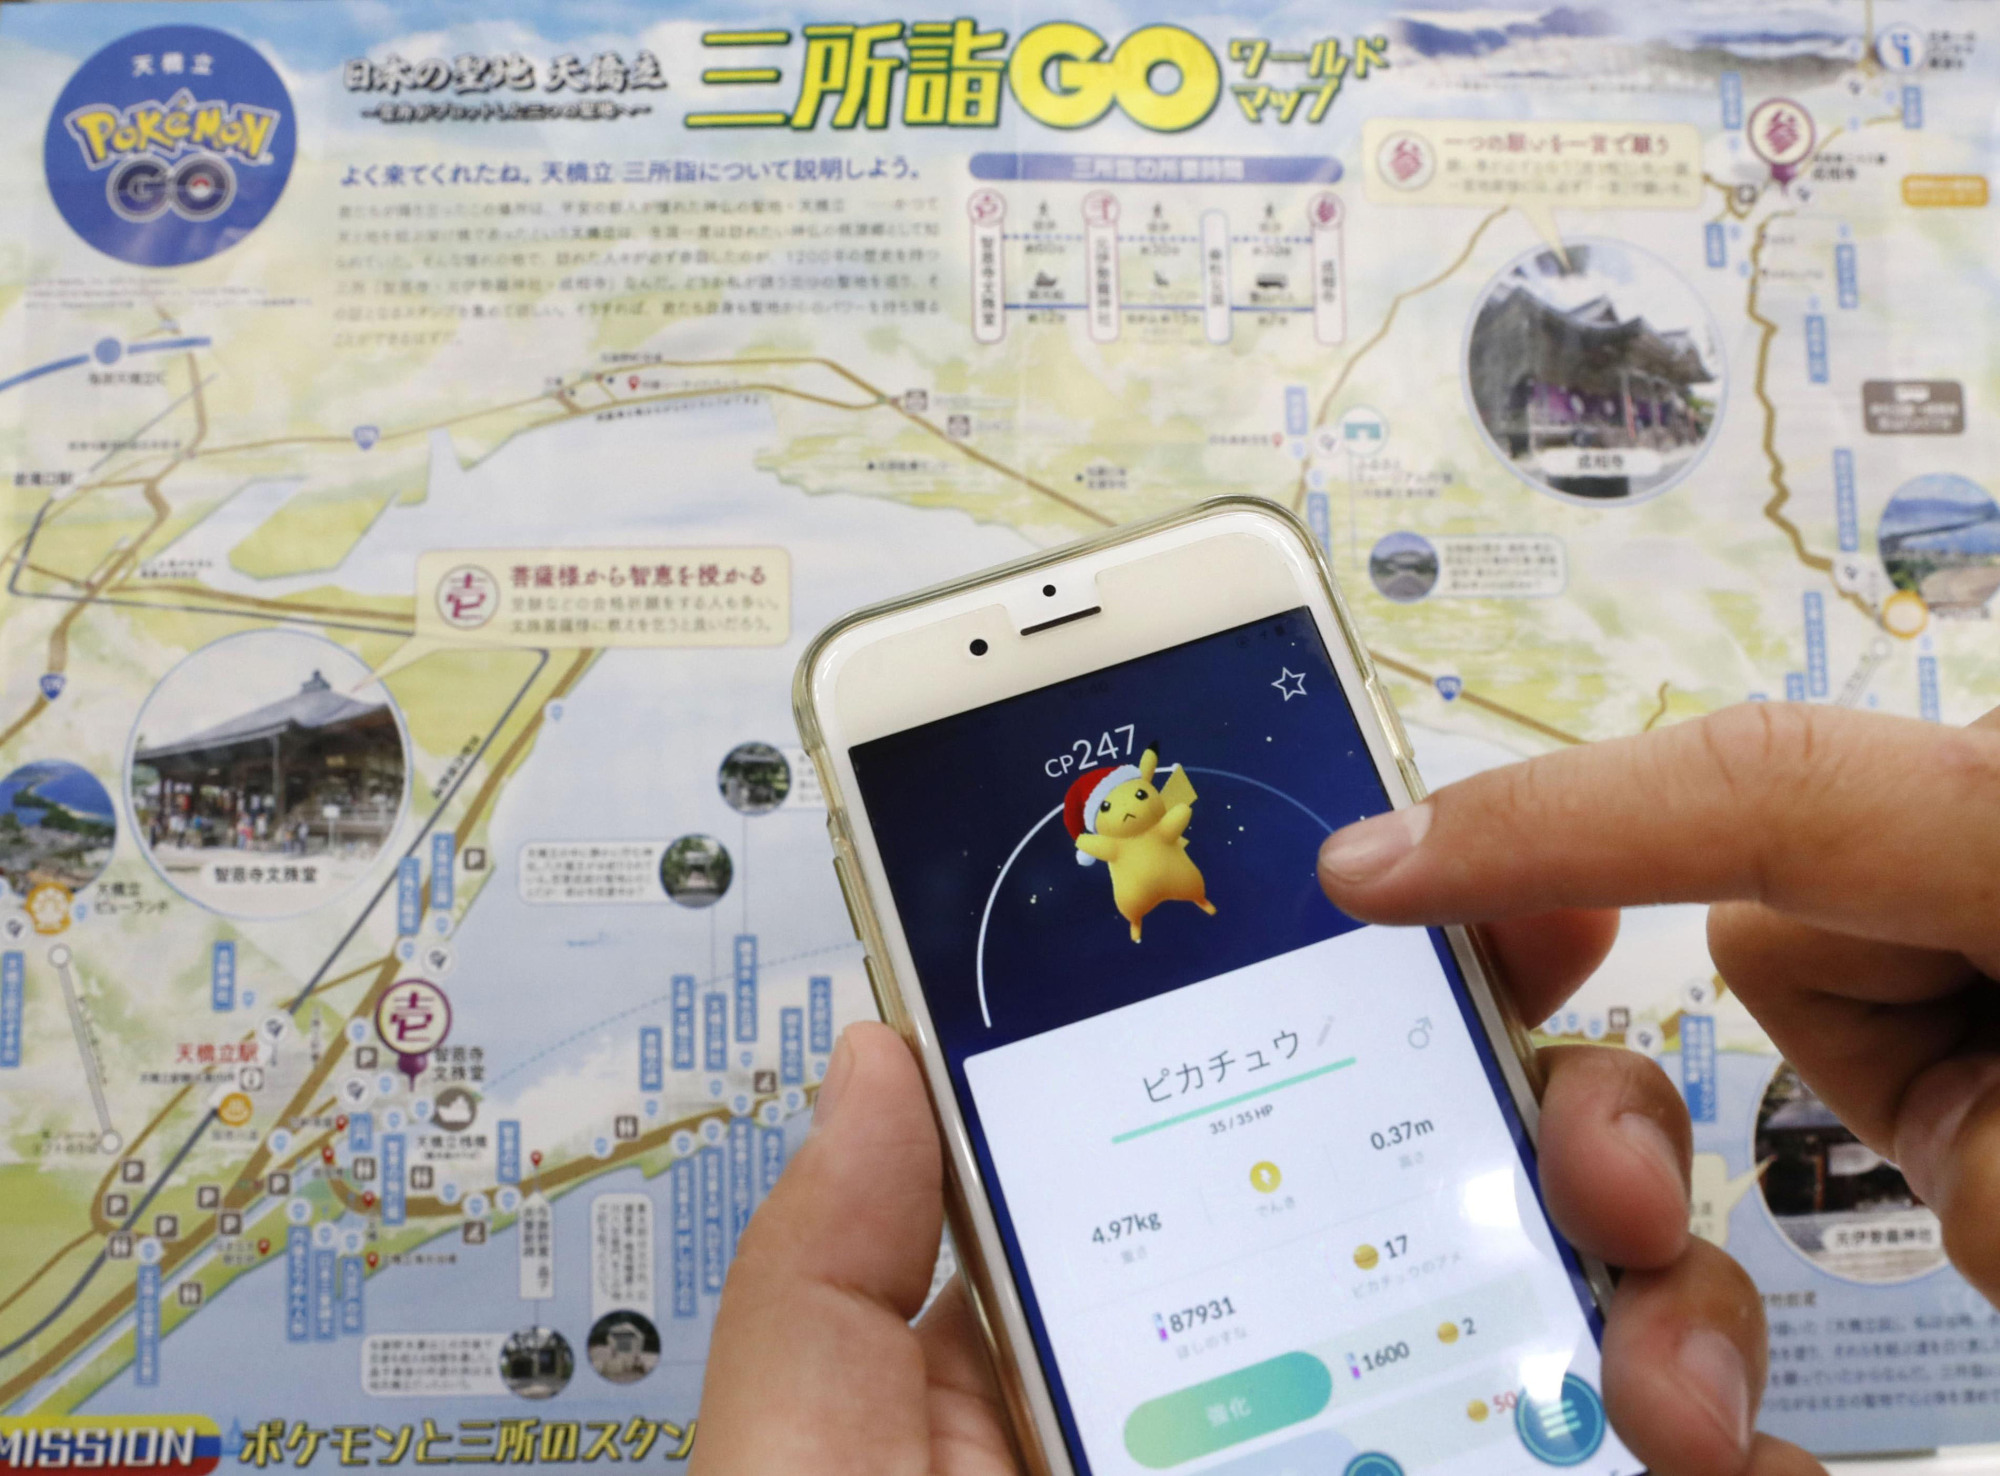 Pokemon Go' turns into a fitness tool for Japan's middle-aged - The Japan  Times